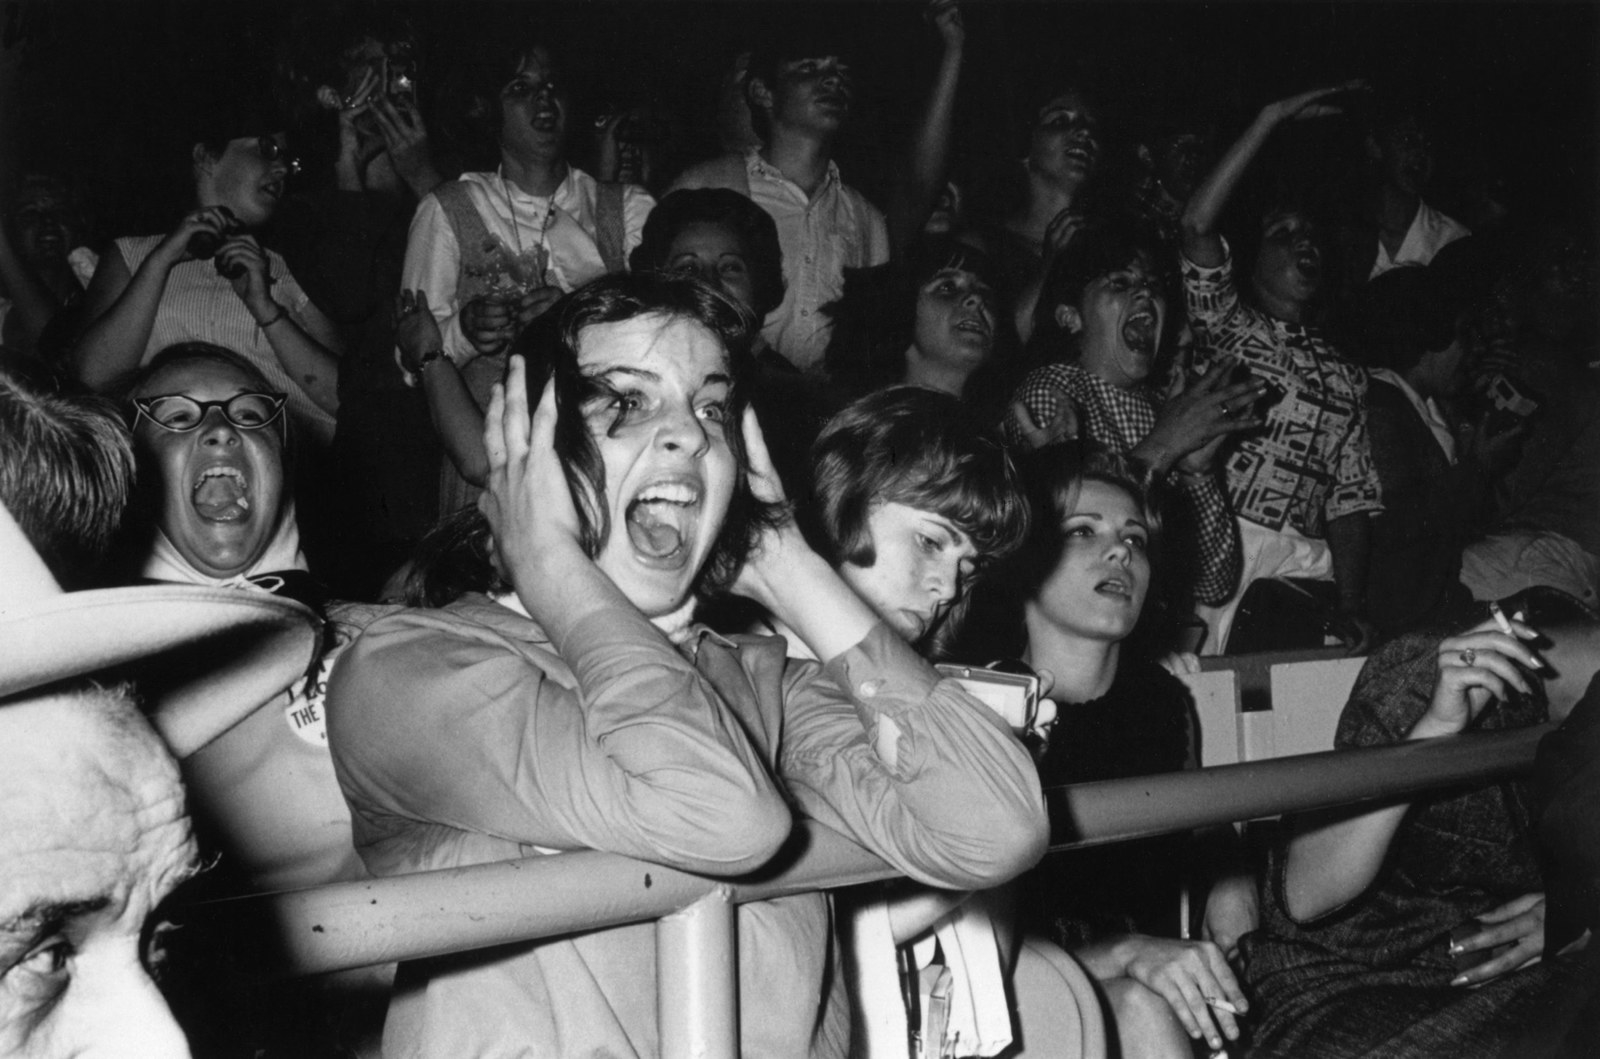 23 Photos That Prove Beatles Fans Were Doing The Absolute Most In The 60s